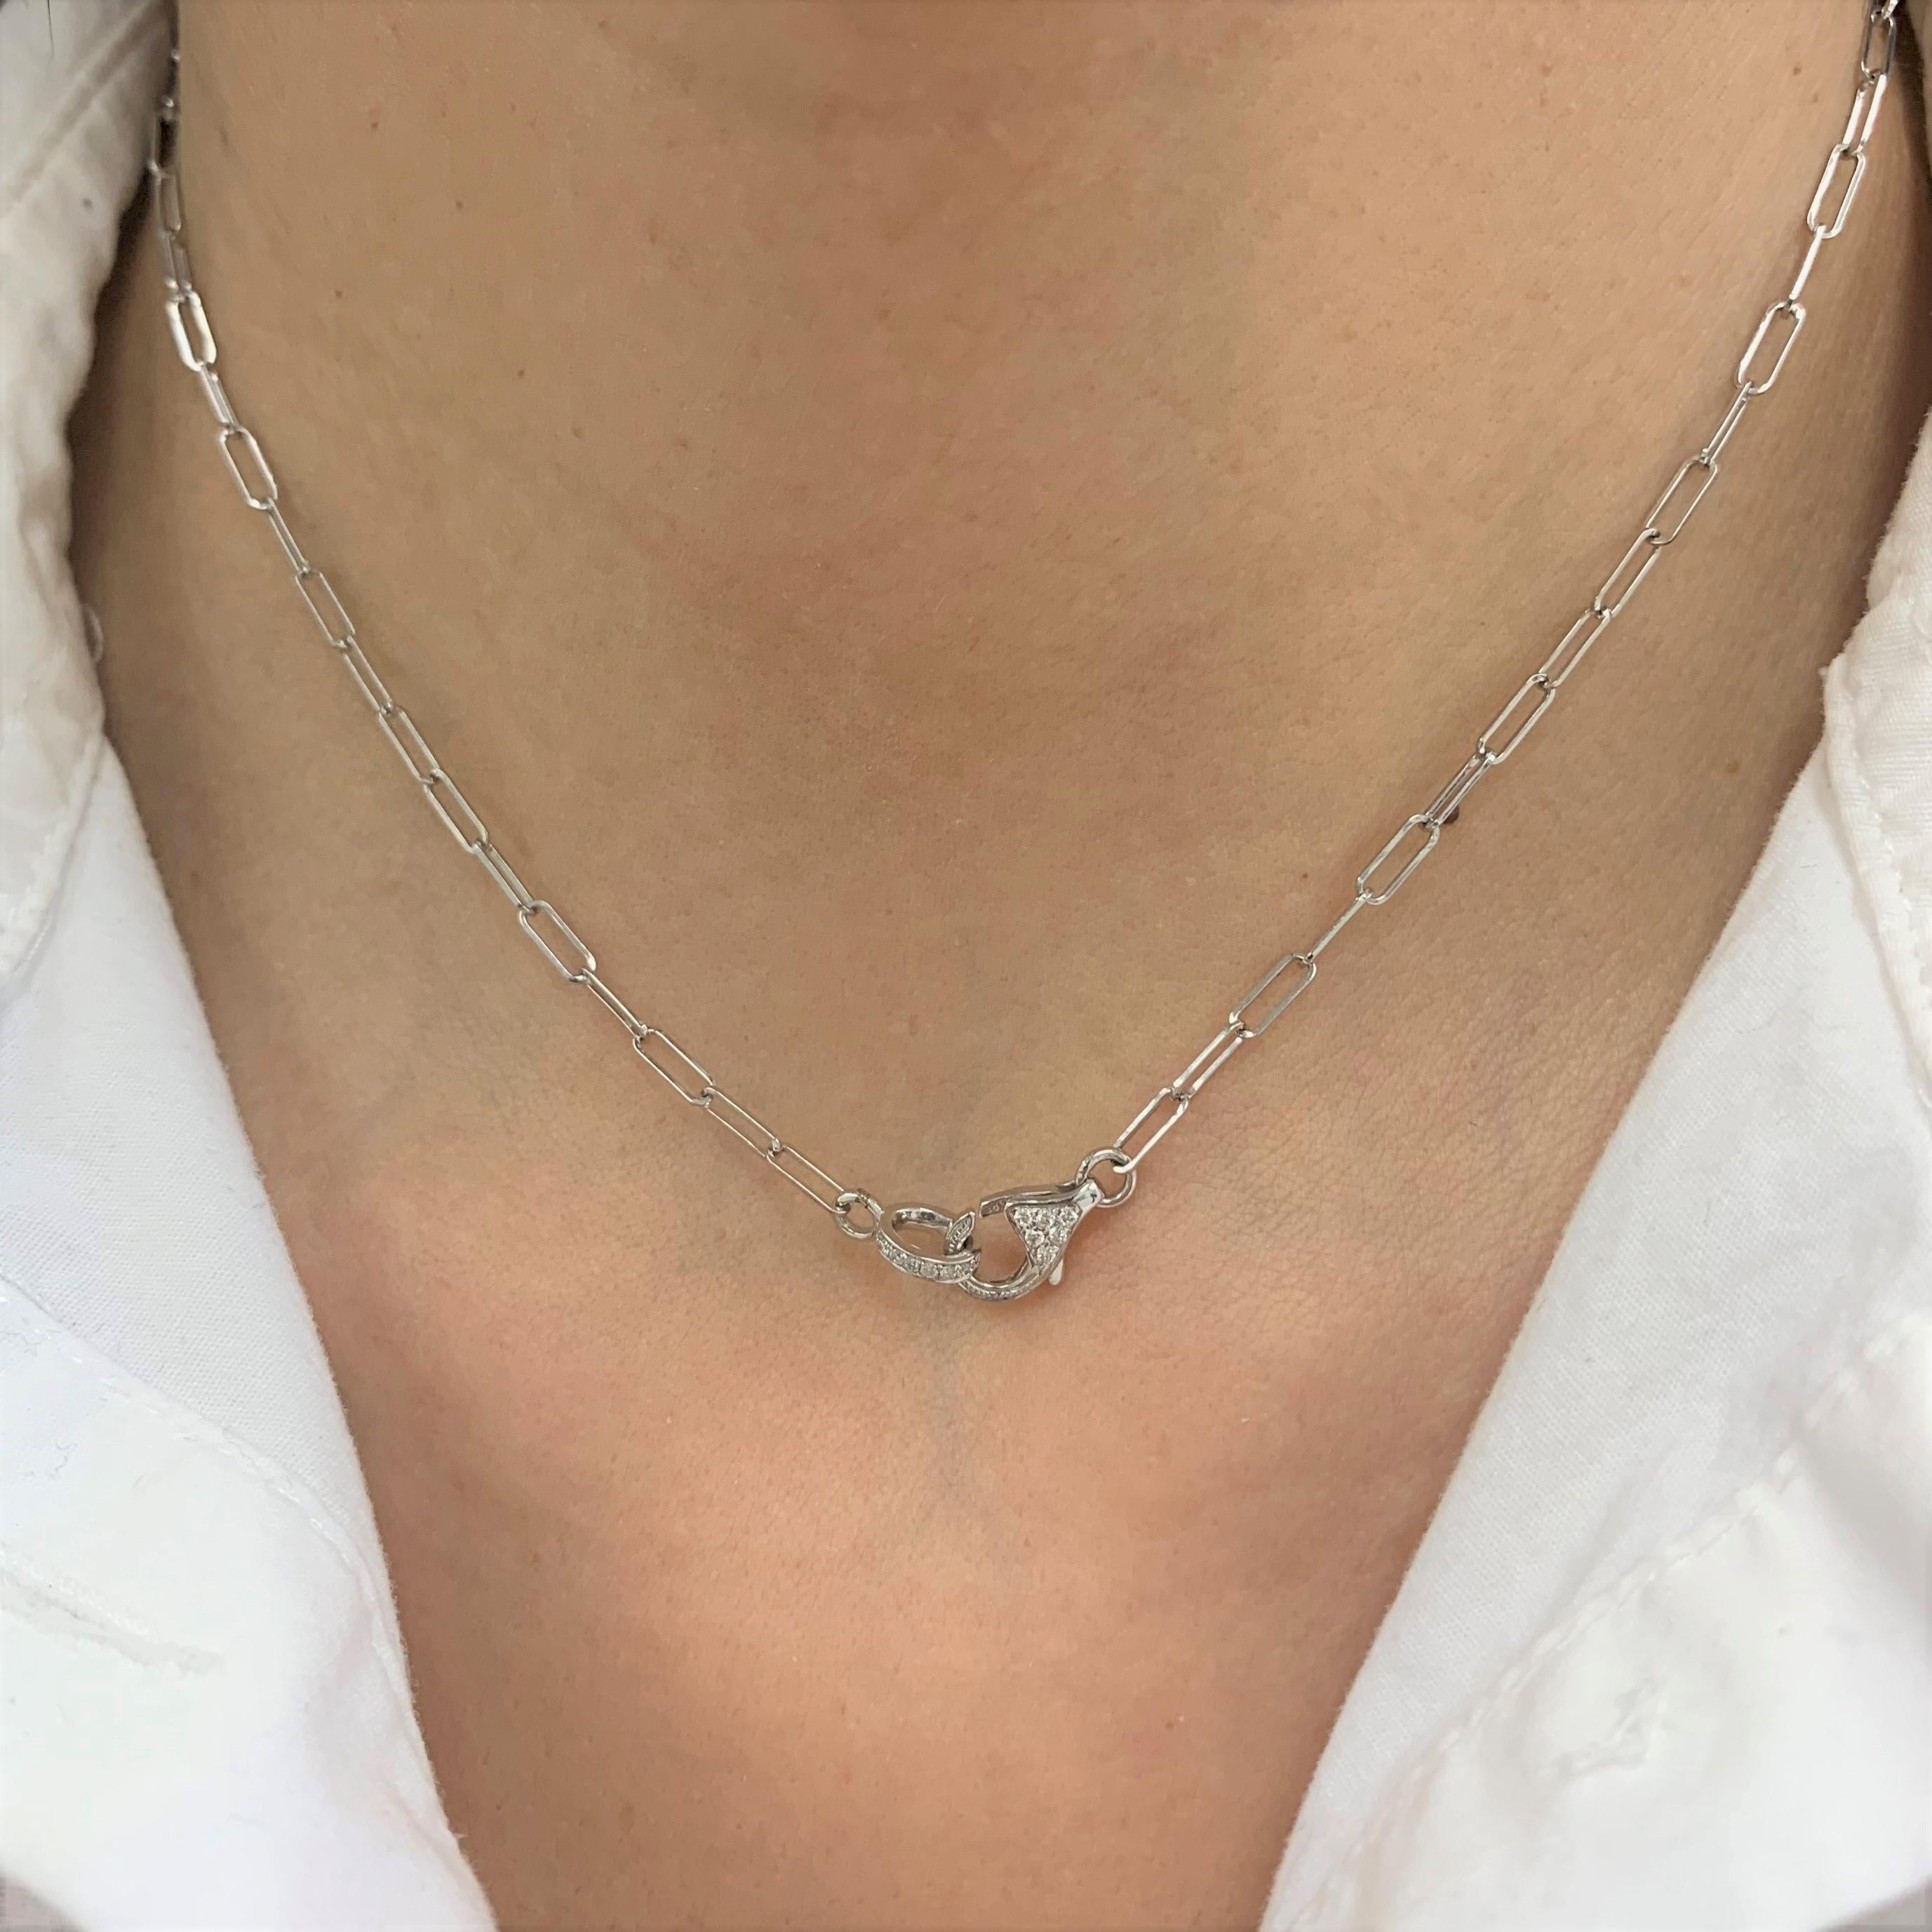 This beautiful 14k Gold Lobster Link Necklace features 0.13 ct of round natural Diamonds on both side of lock. 
-14K Gold
-0.13cts Natural White Diamonds
-Diamond Color GH
-Clarity SI1
-Lobster Link Necklace
-Gift Box Included